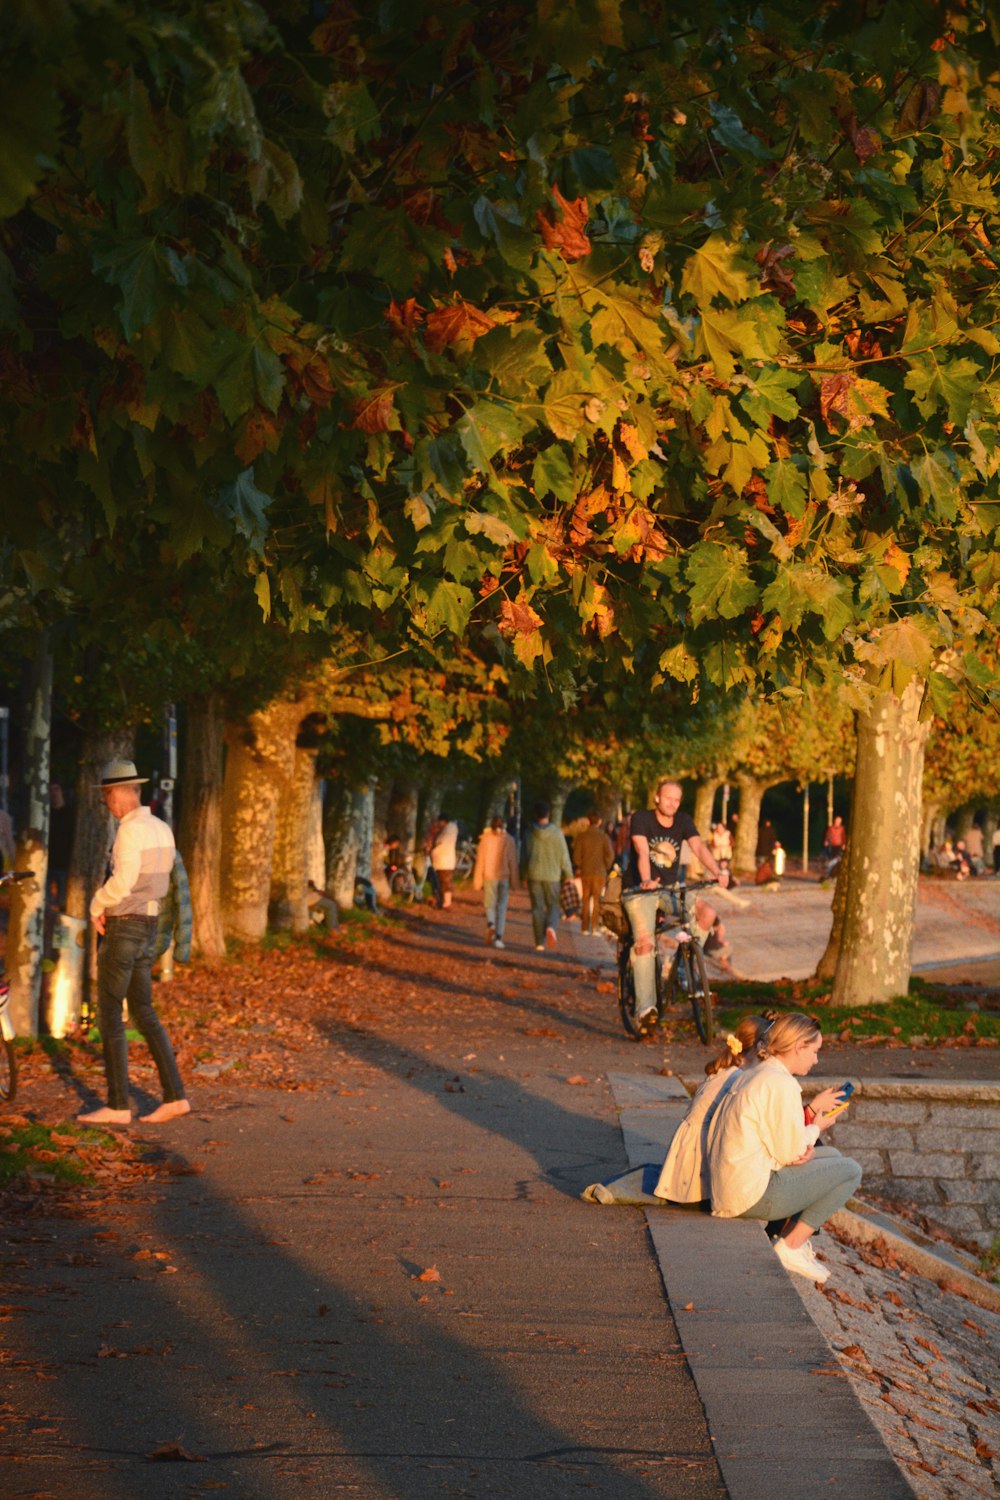 a group of people sitting on a sidewalk next to trees